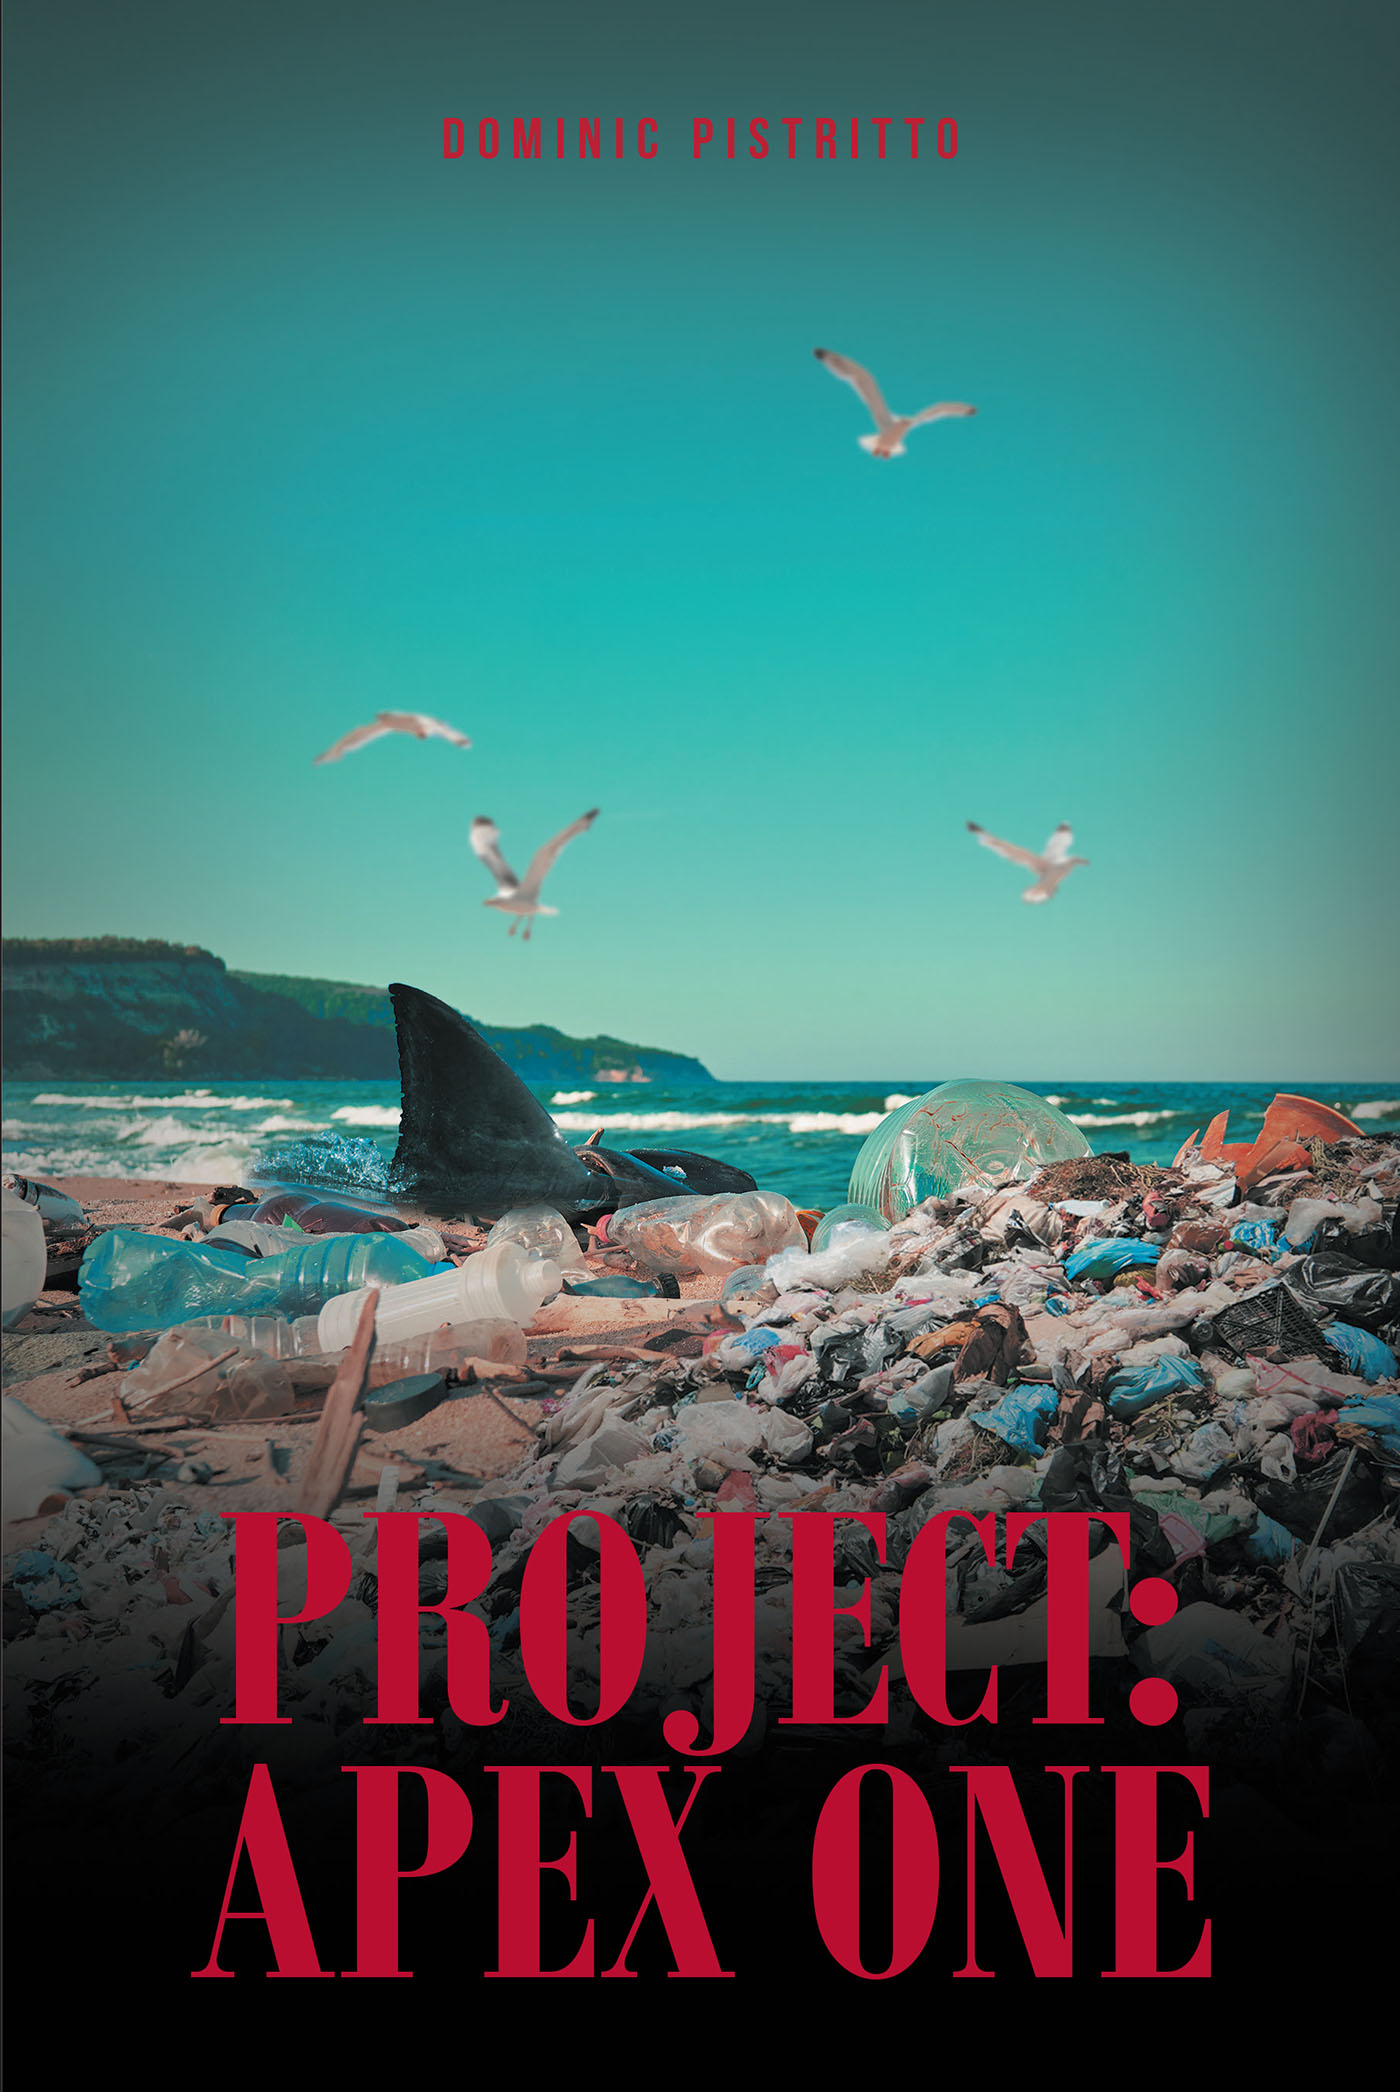 Dominic Pistritto’s New Book, "Project: Apex One," is a Spellbinding Thriller Set in a Future Where the Shark Population is in Dangerous Decline Due to Mankind's Folly